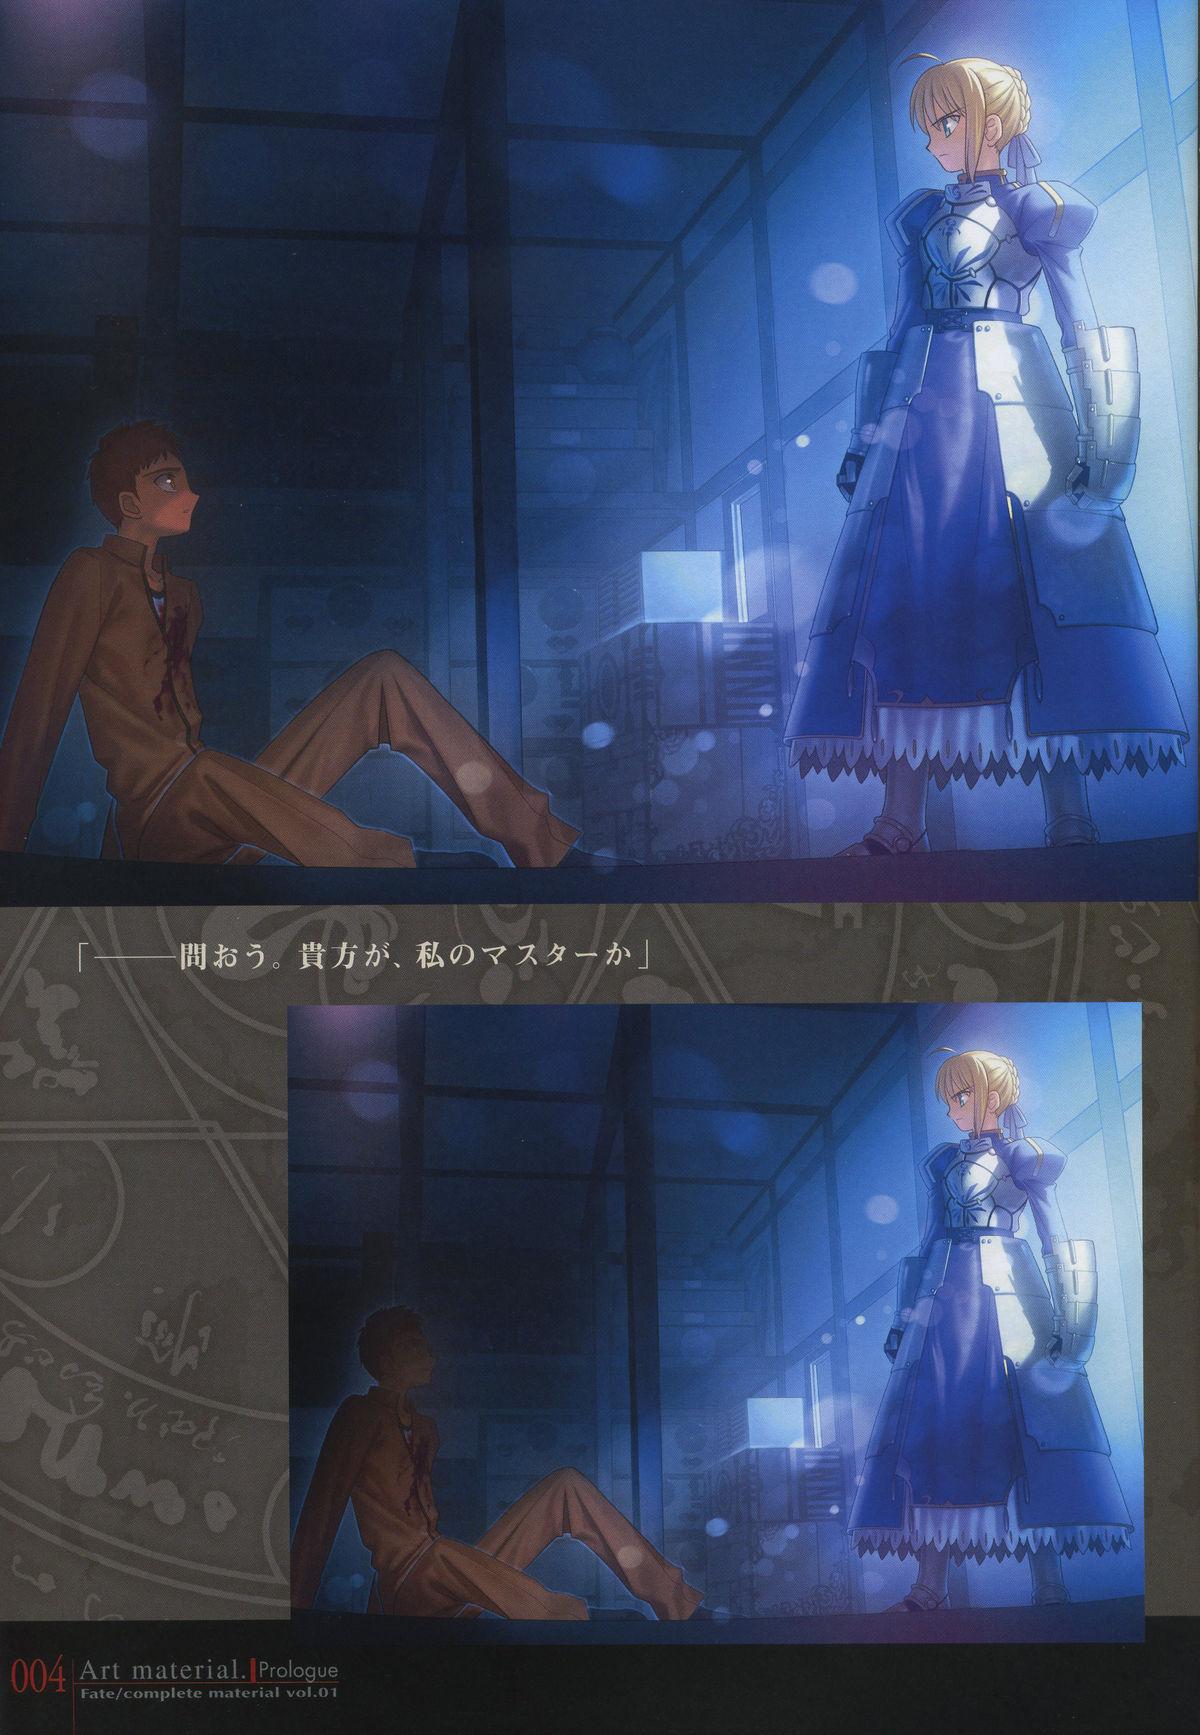 Fate/complete material I - Art material. 8